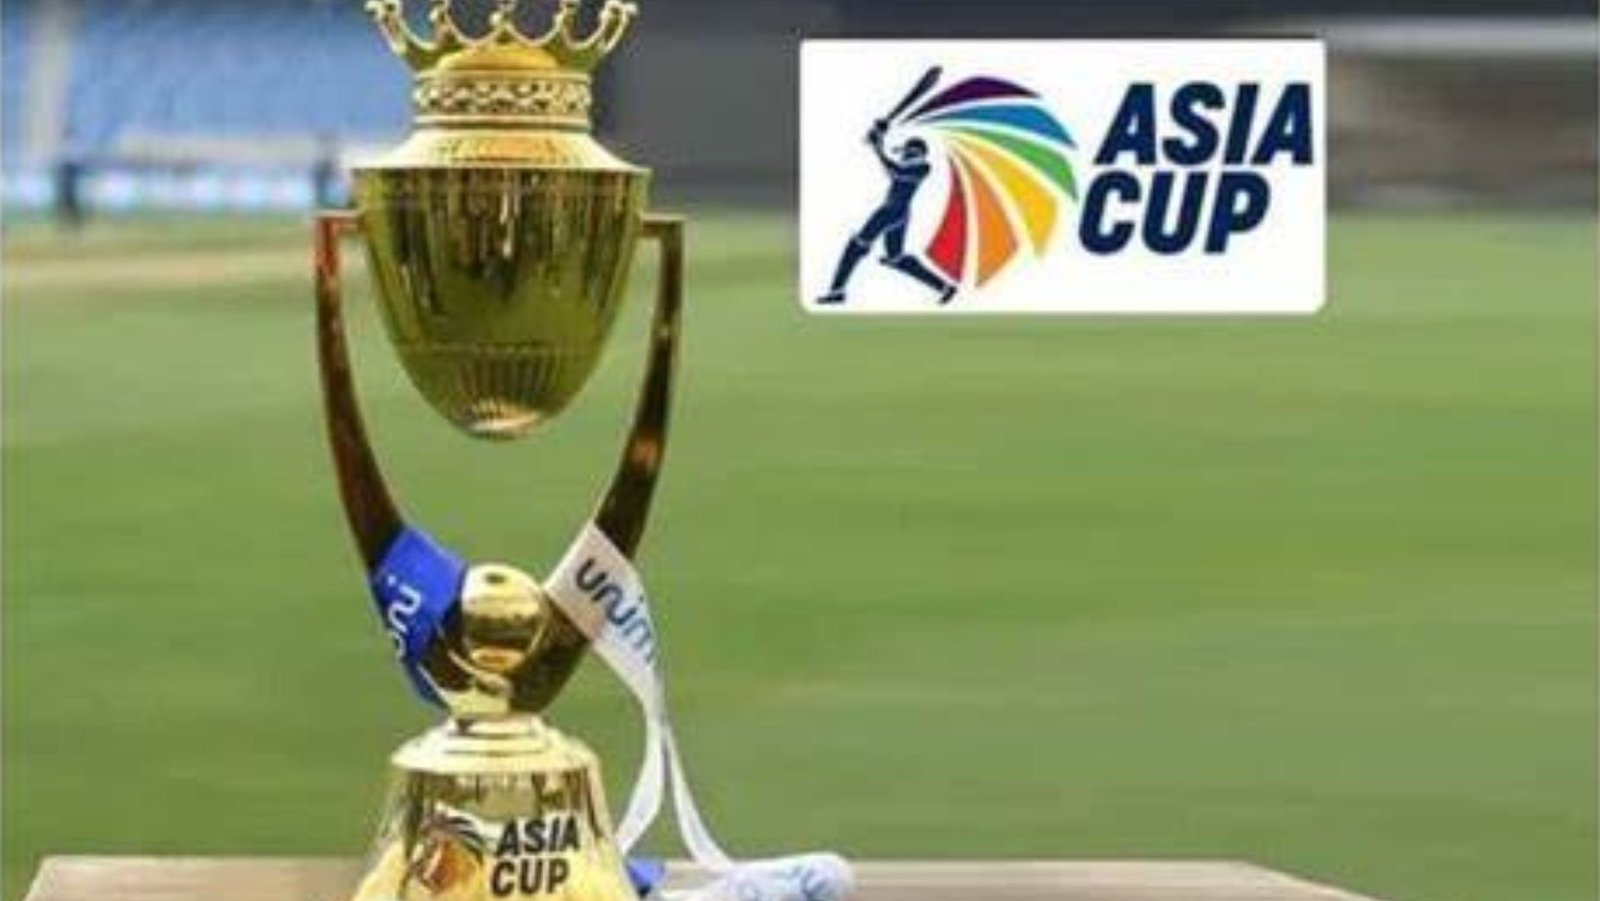 Pakistan and India will face off on August 28 as part of the 2022 Asia Cup schedule